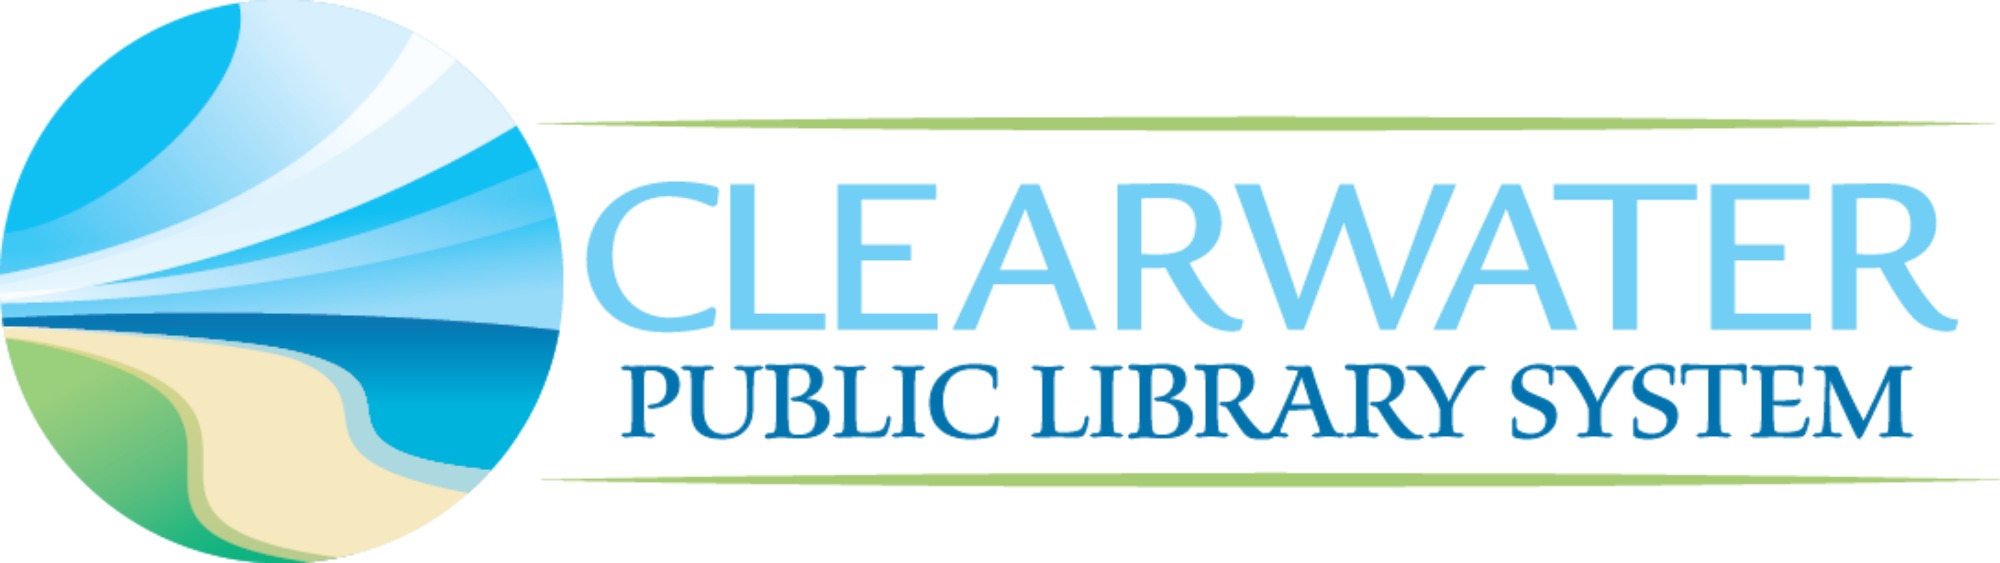 Clearwater Public Library System logo